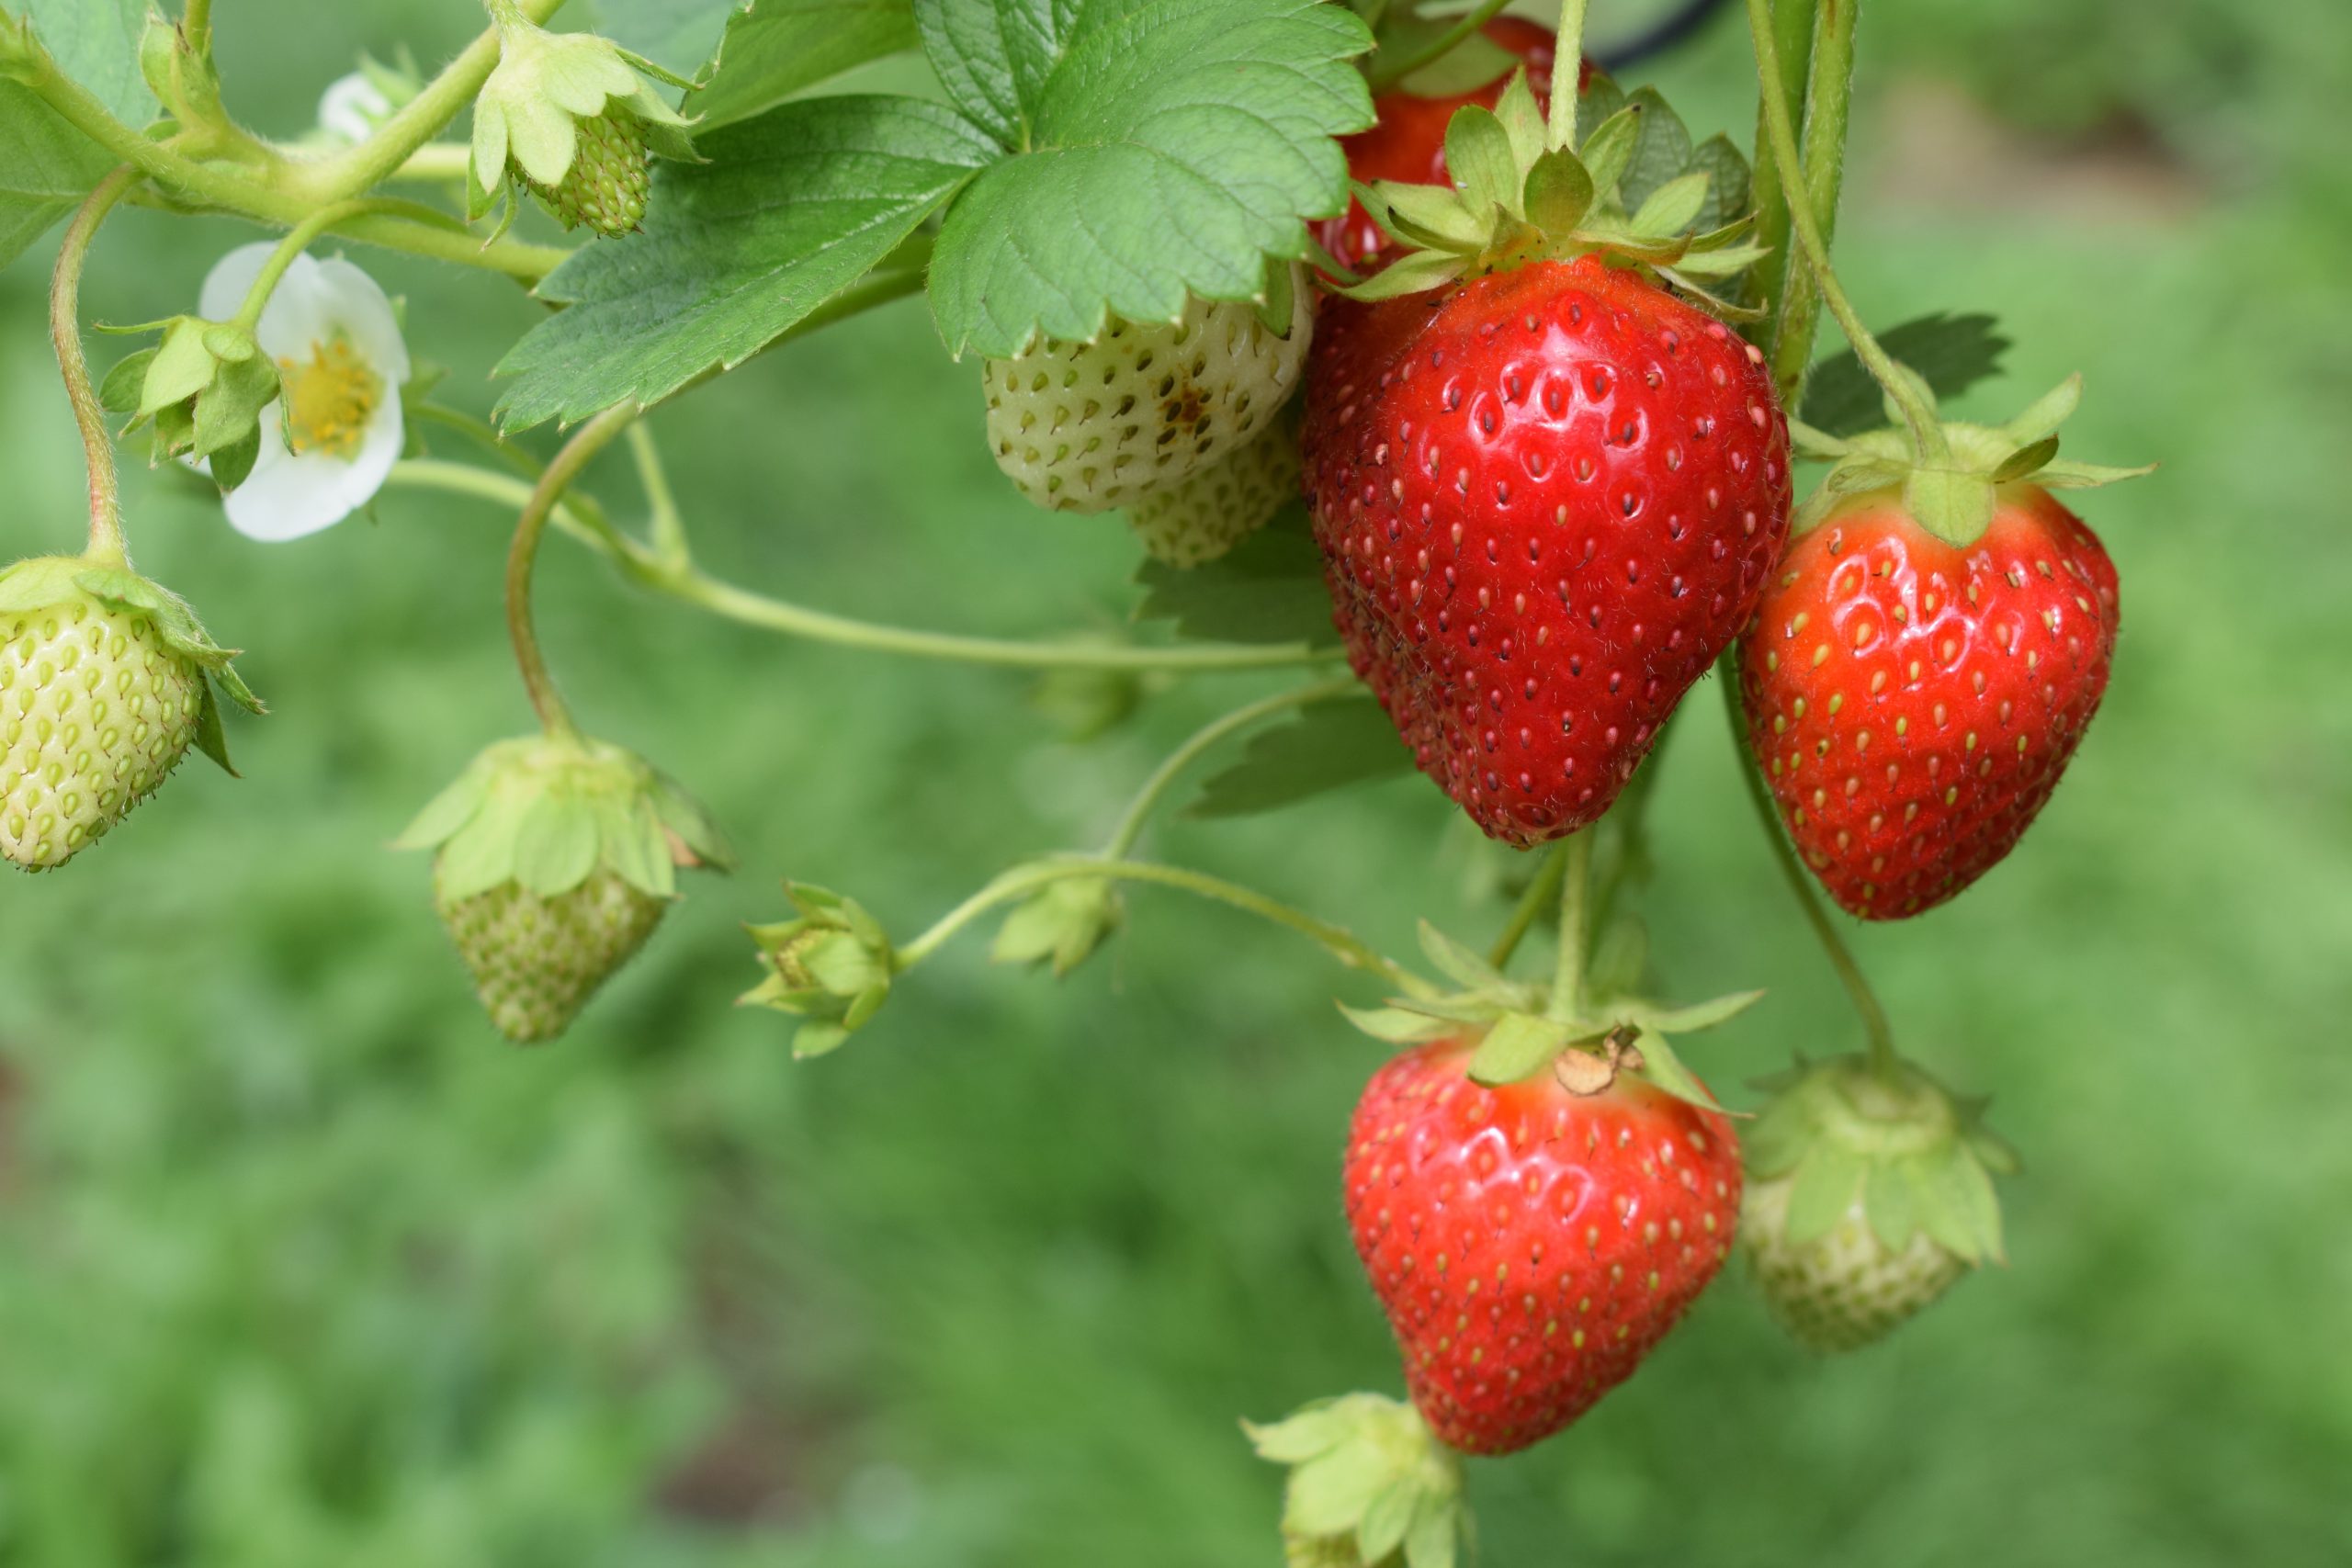 Things To Do In The New Forest - Goodall's Strawberry Farm